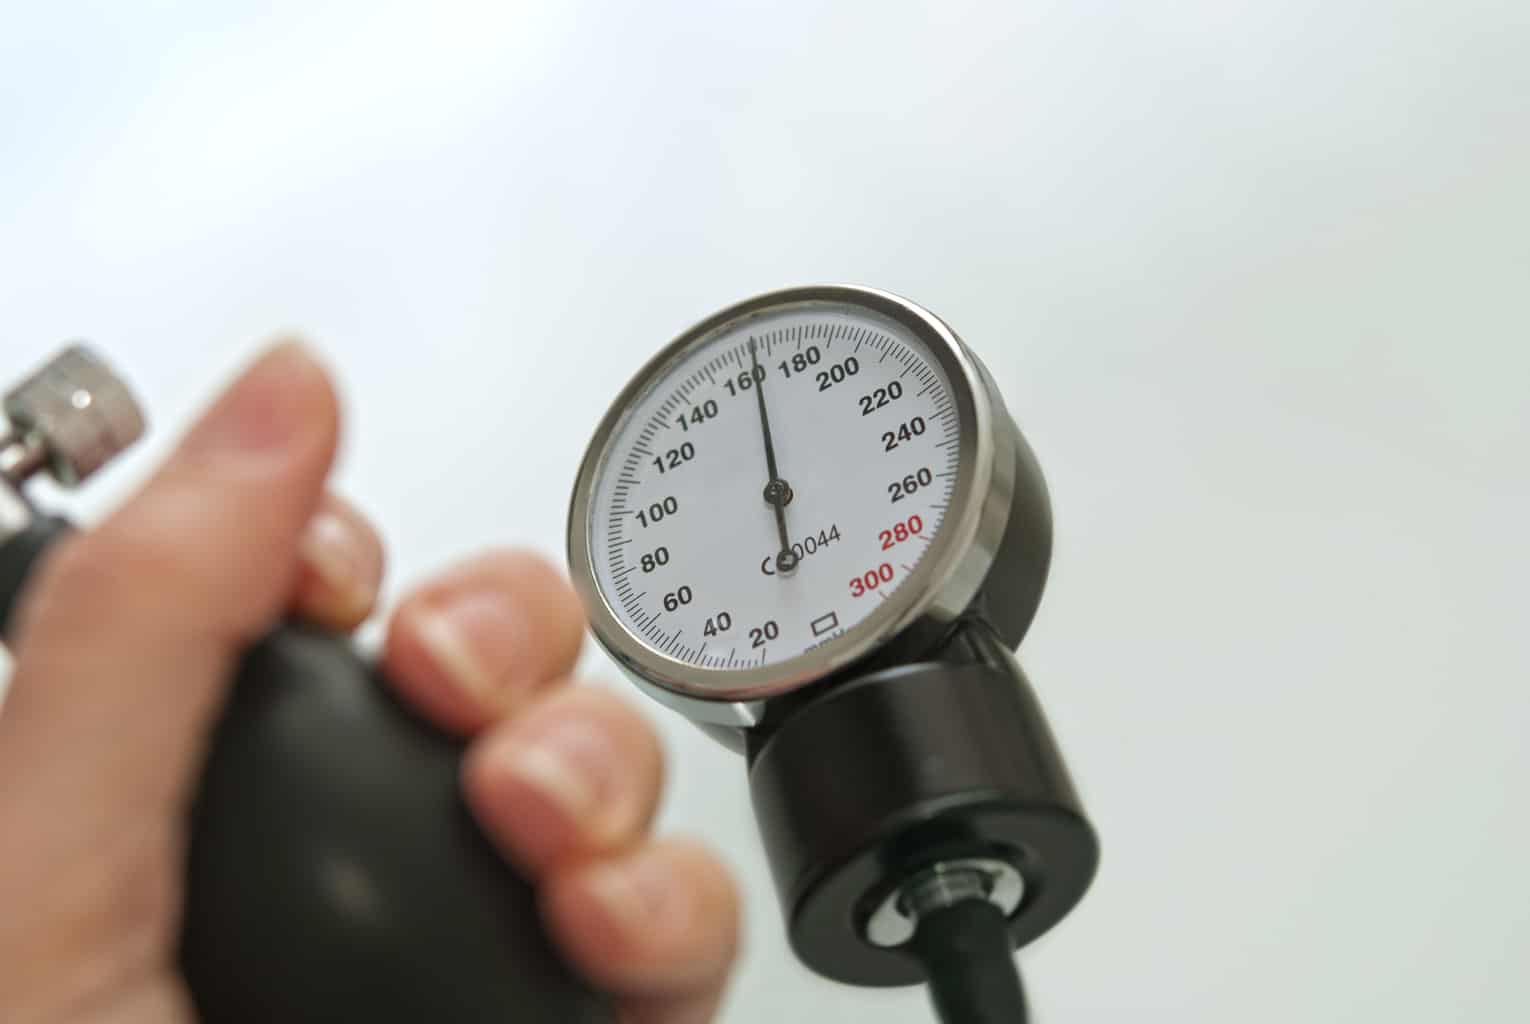 High blood pressure may be saving your life